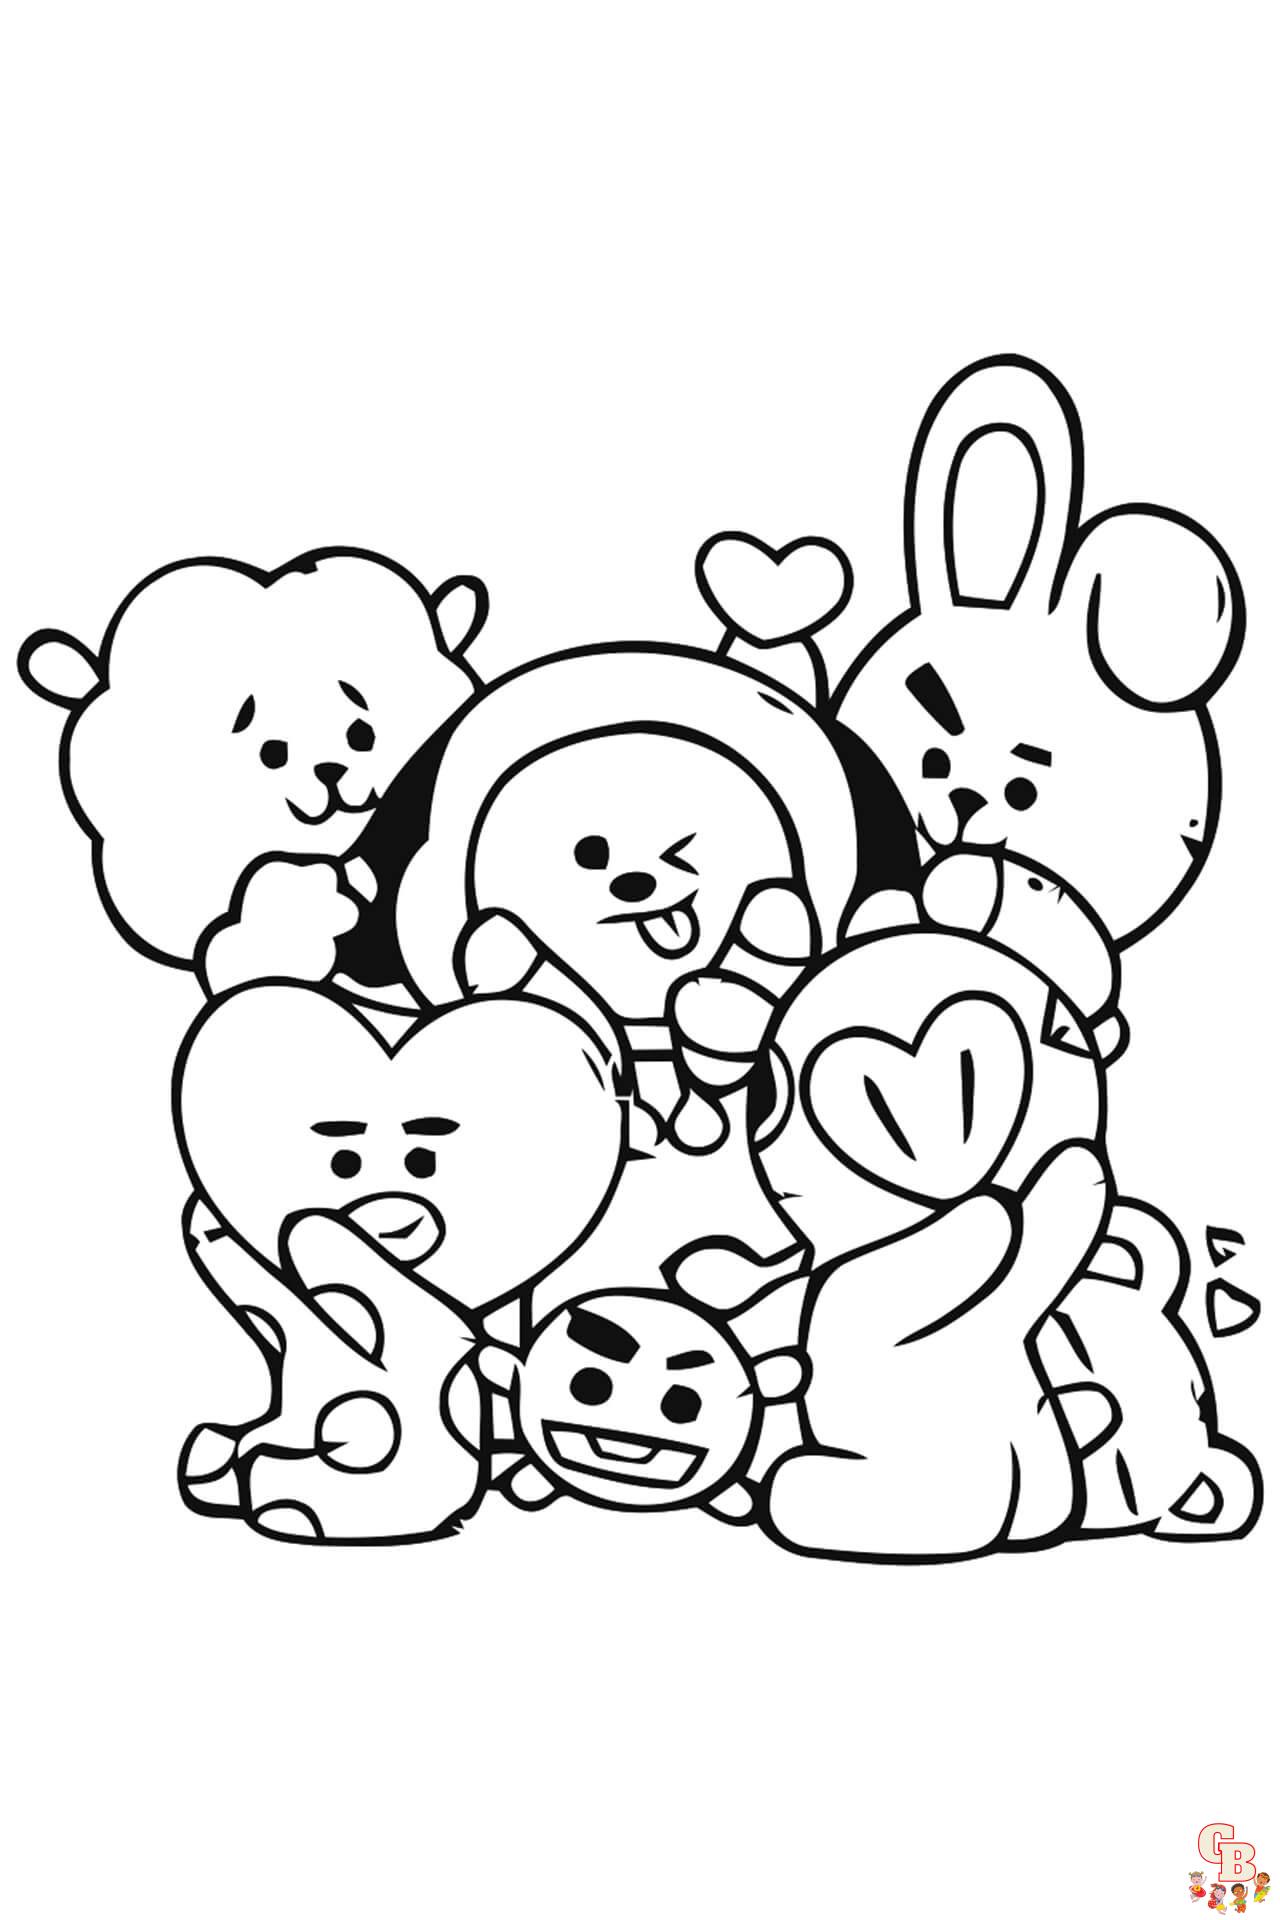 BT21 Coloring Pages 4